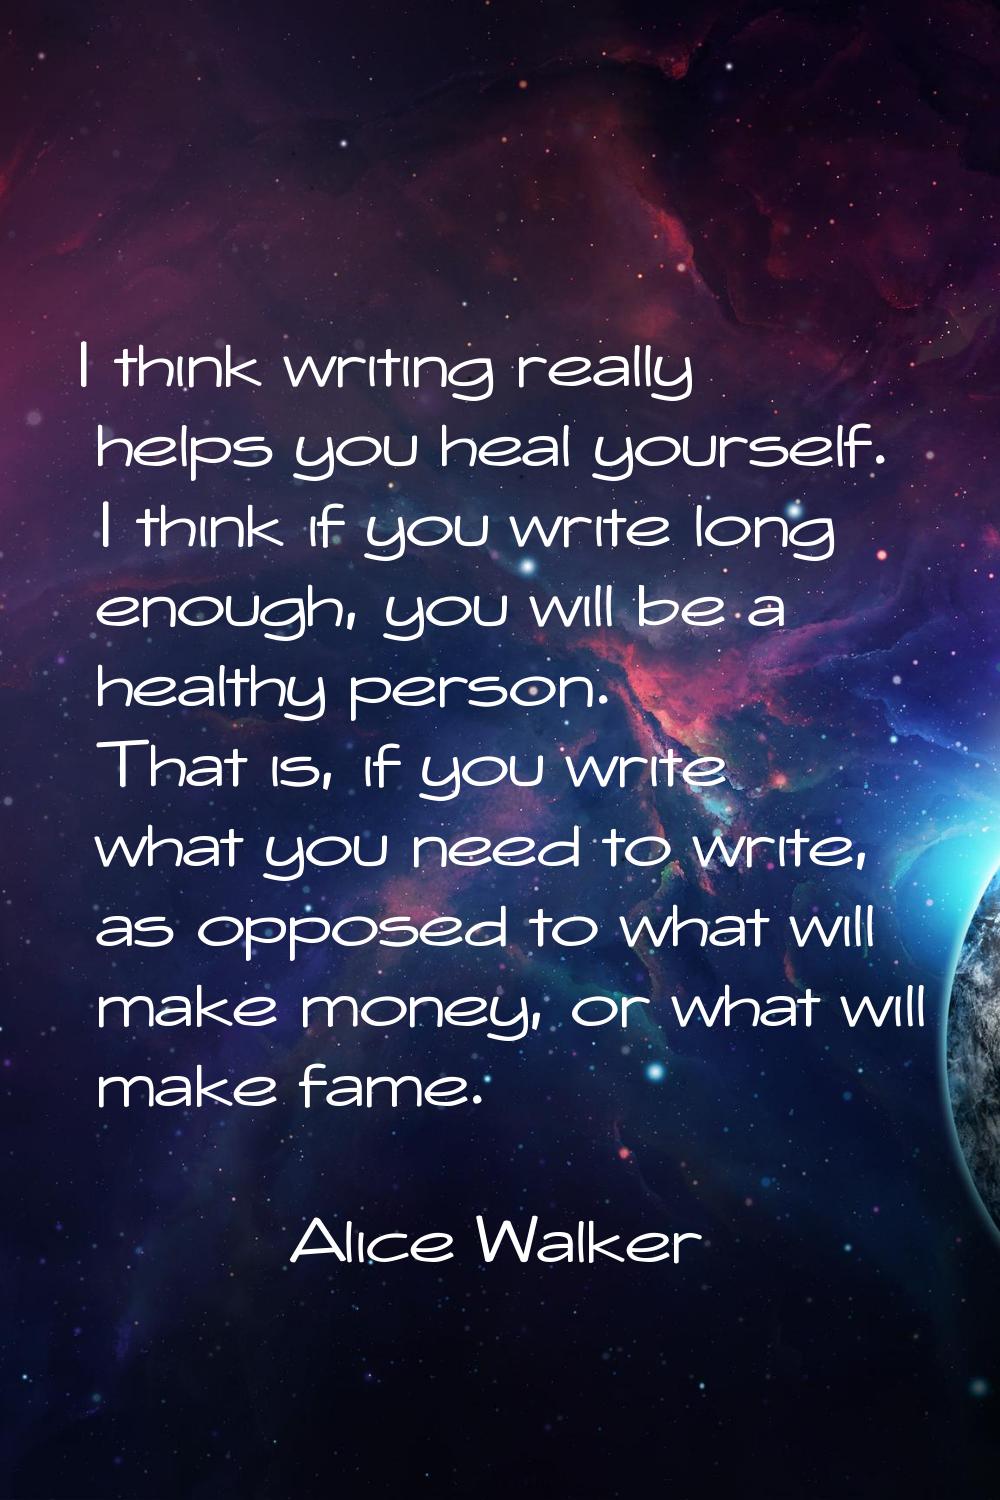 I think writing really helps you heal yourself. I think if you write long enough, you will be a hea